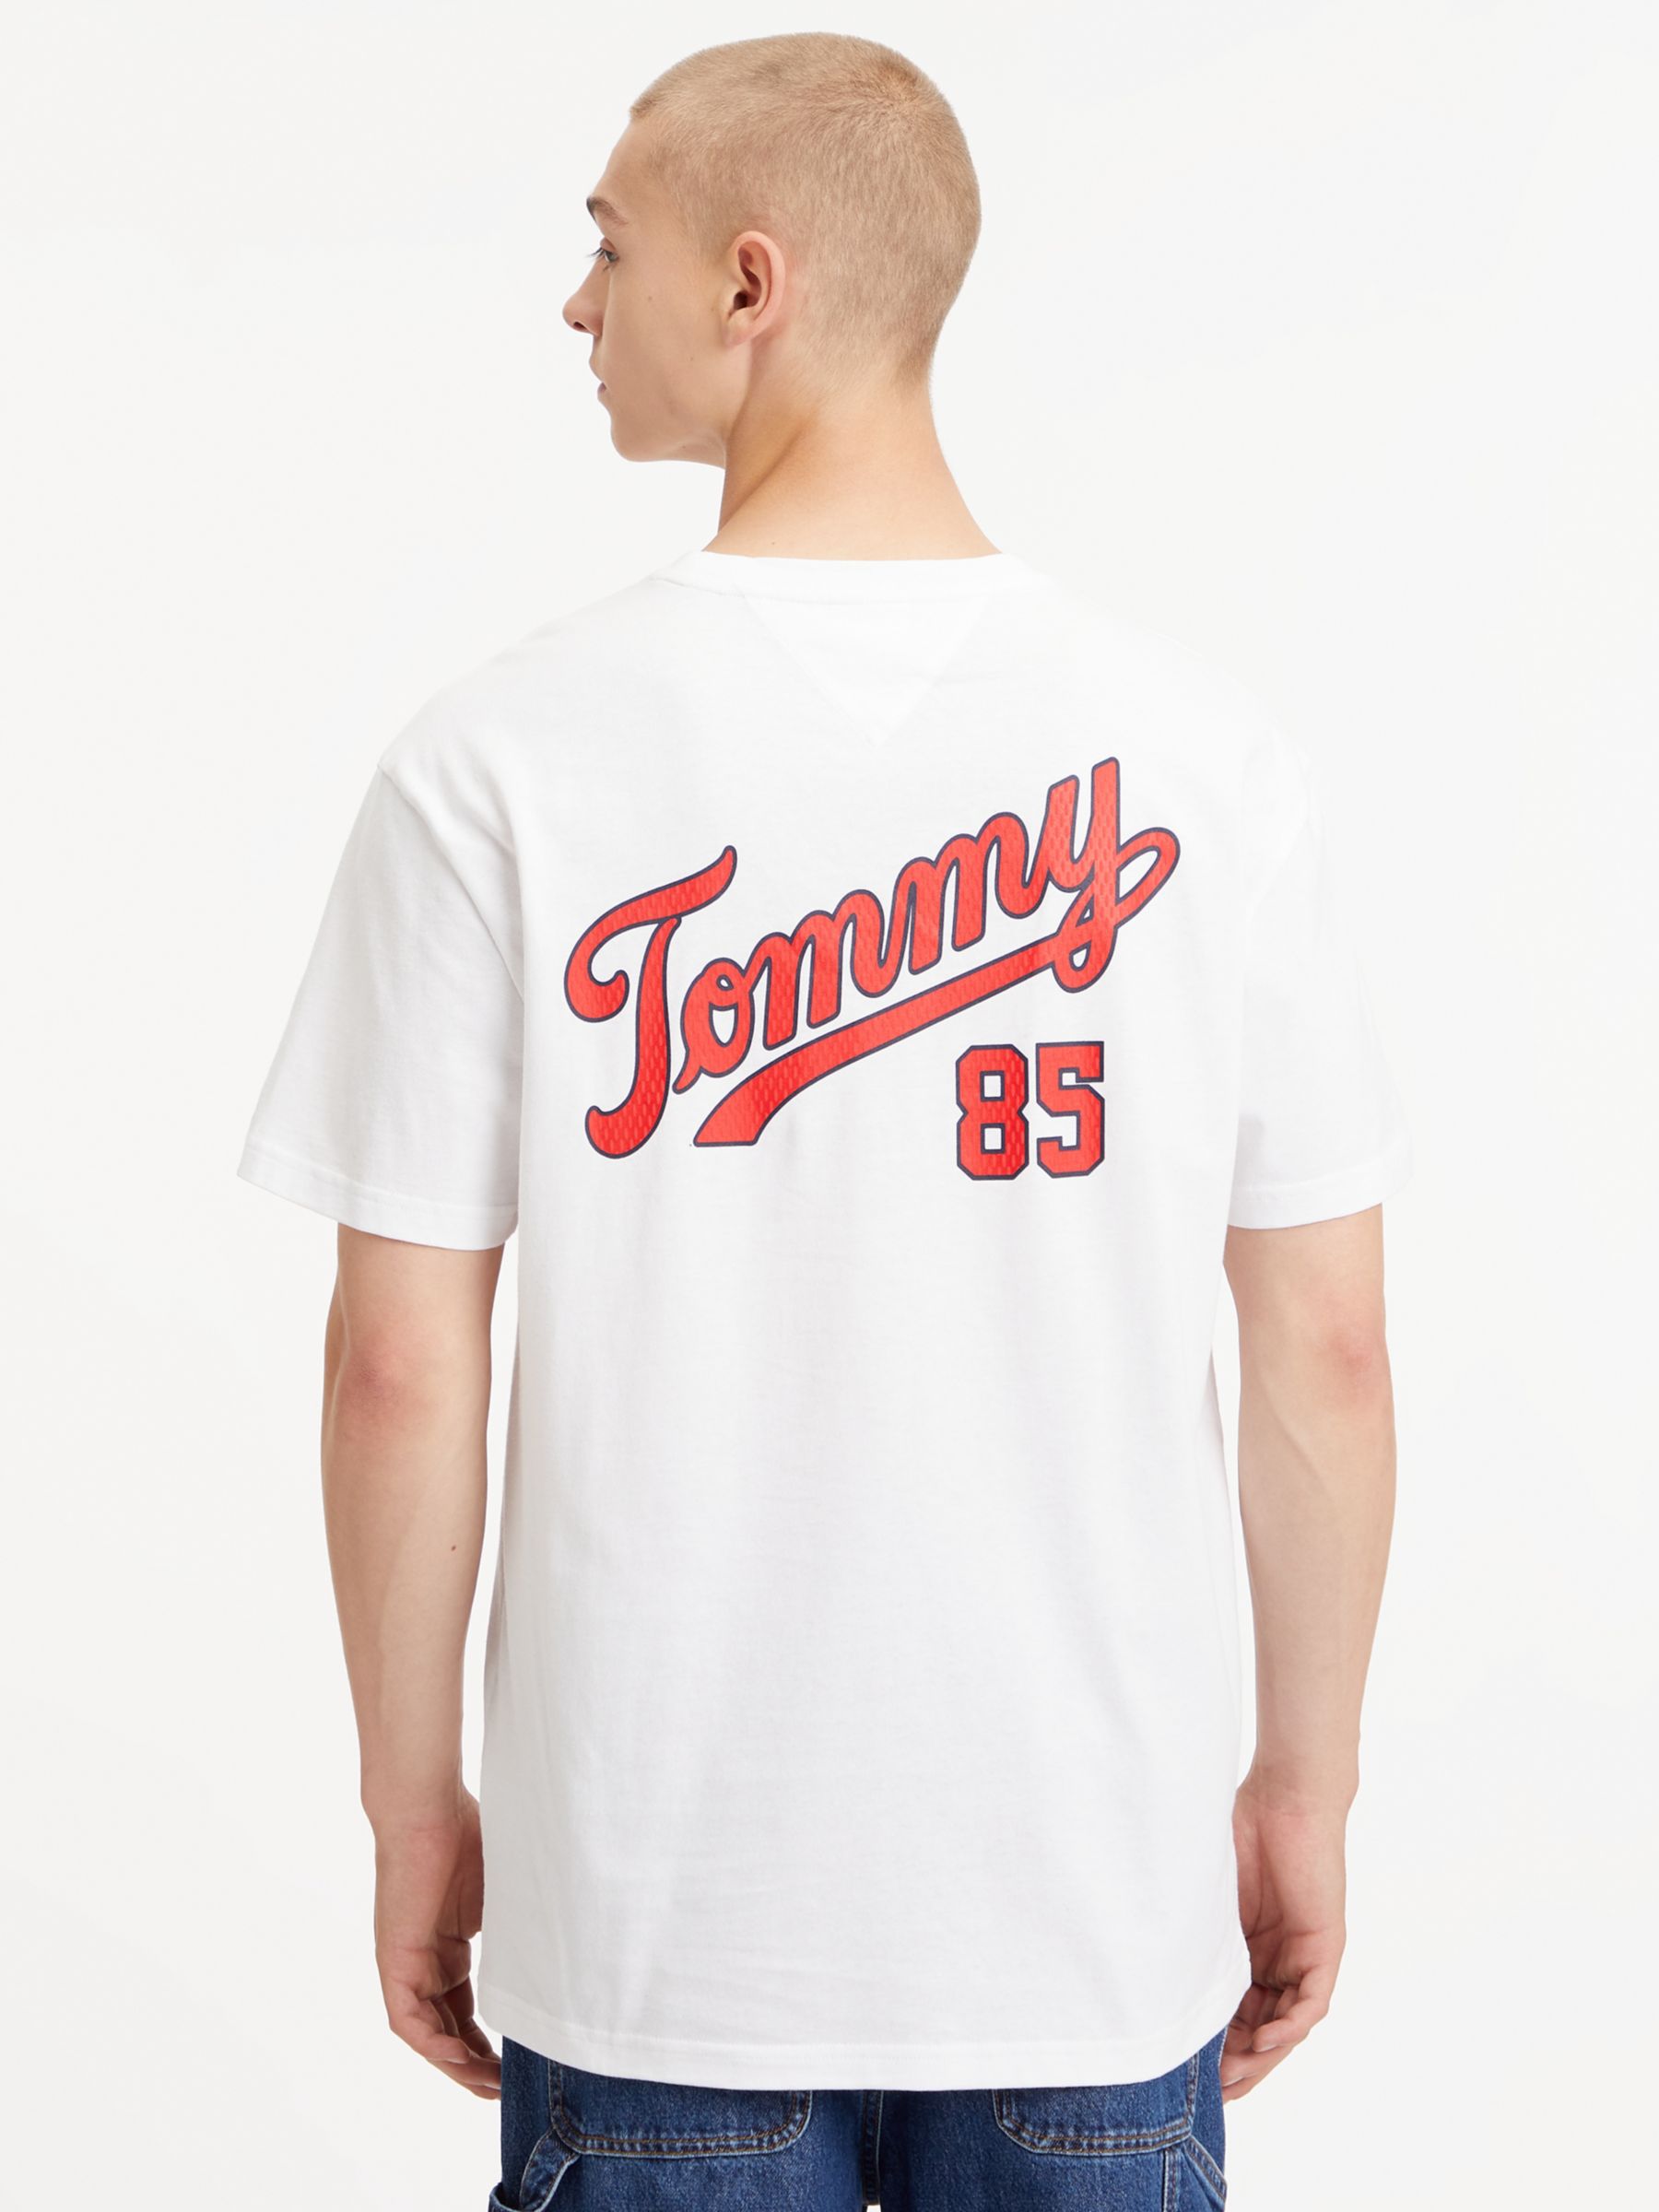 Tommy Jeans Organic Cotton Partners at John Logo College 85 & White Lewis T-Shirt